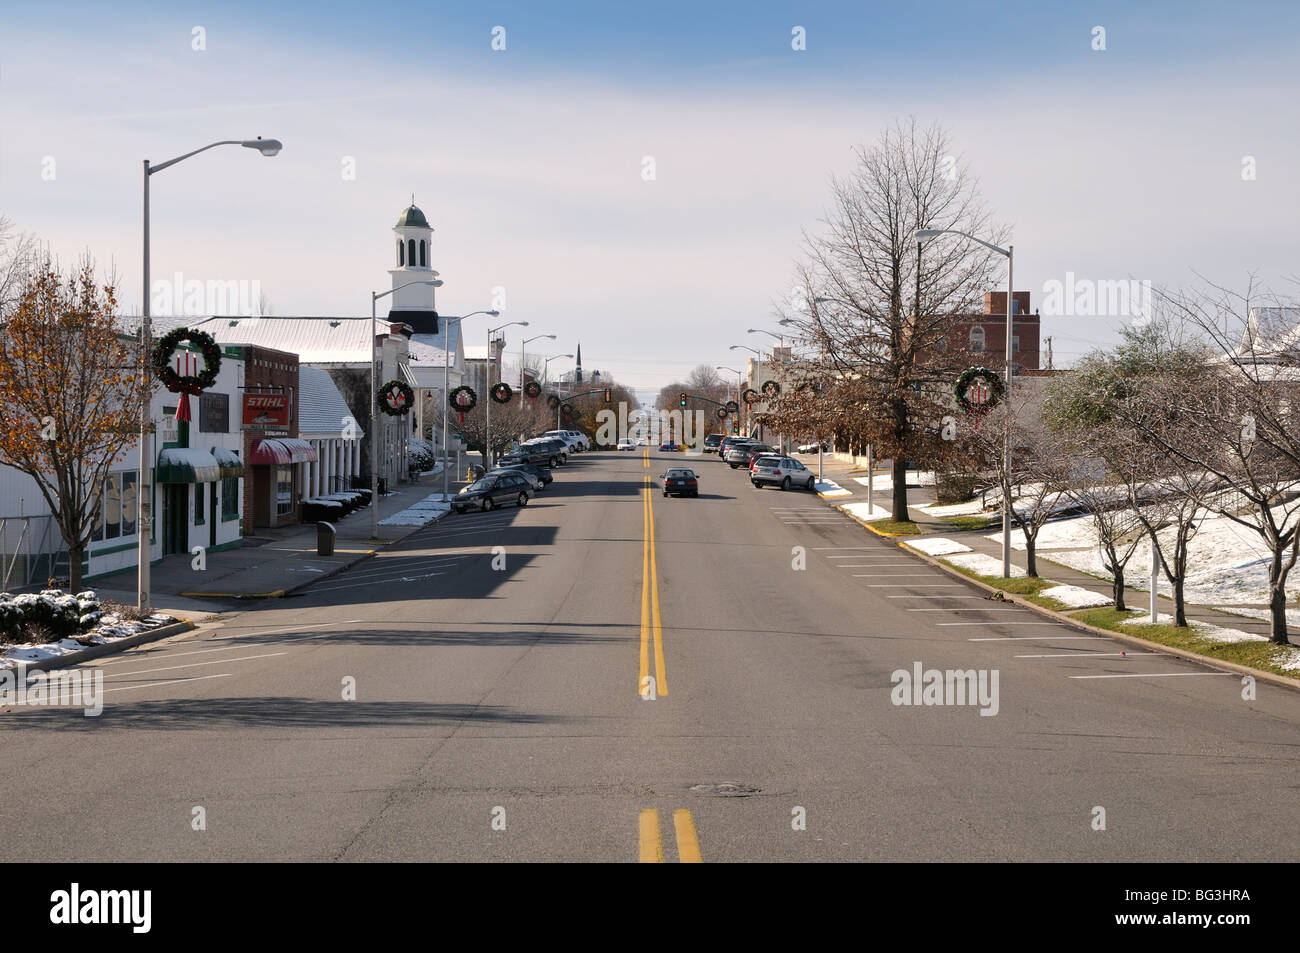 The town of Wytheville, Virginia, USA on a sunny yet snowy December morning. Photo by Darrell Young. Stock Photo